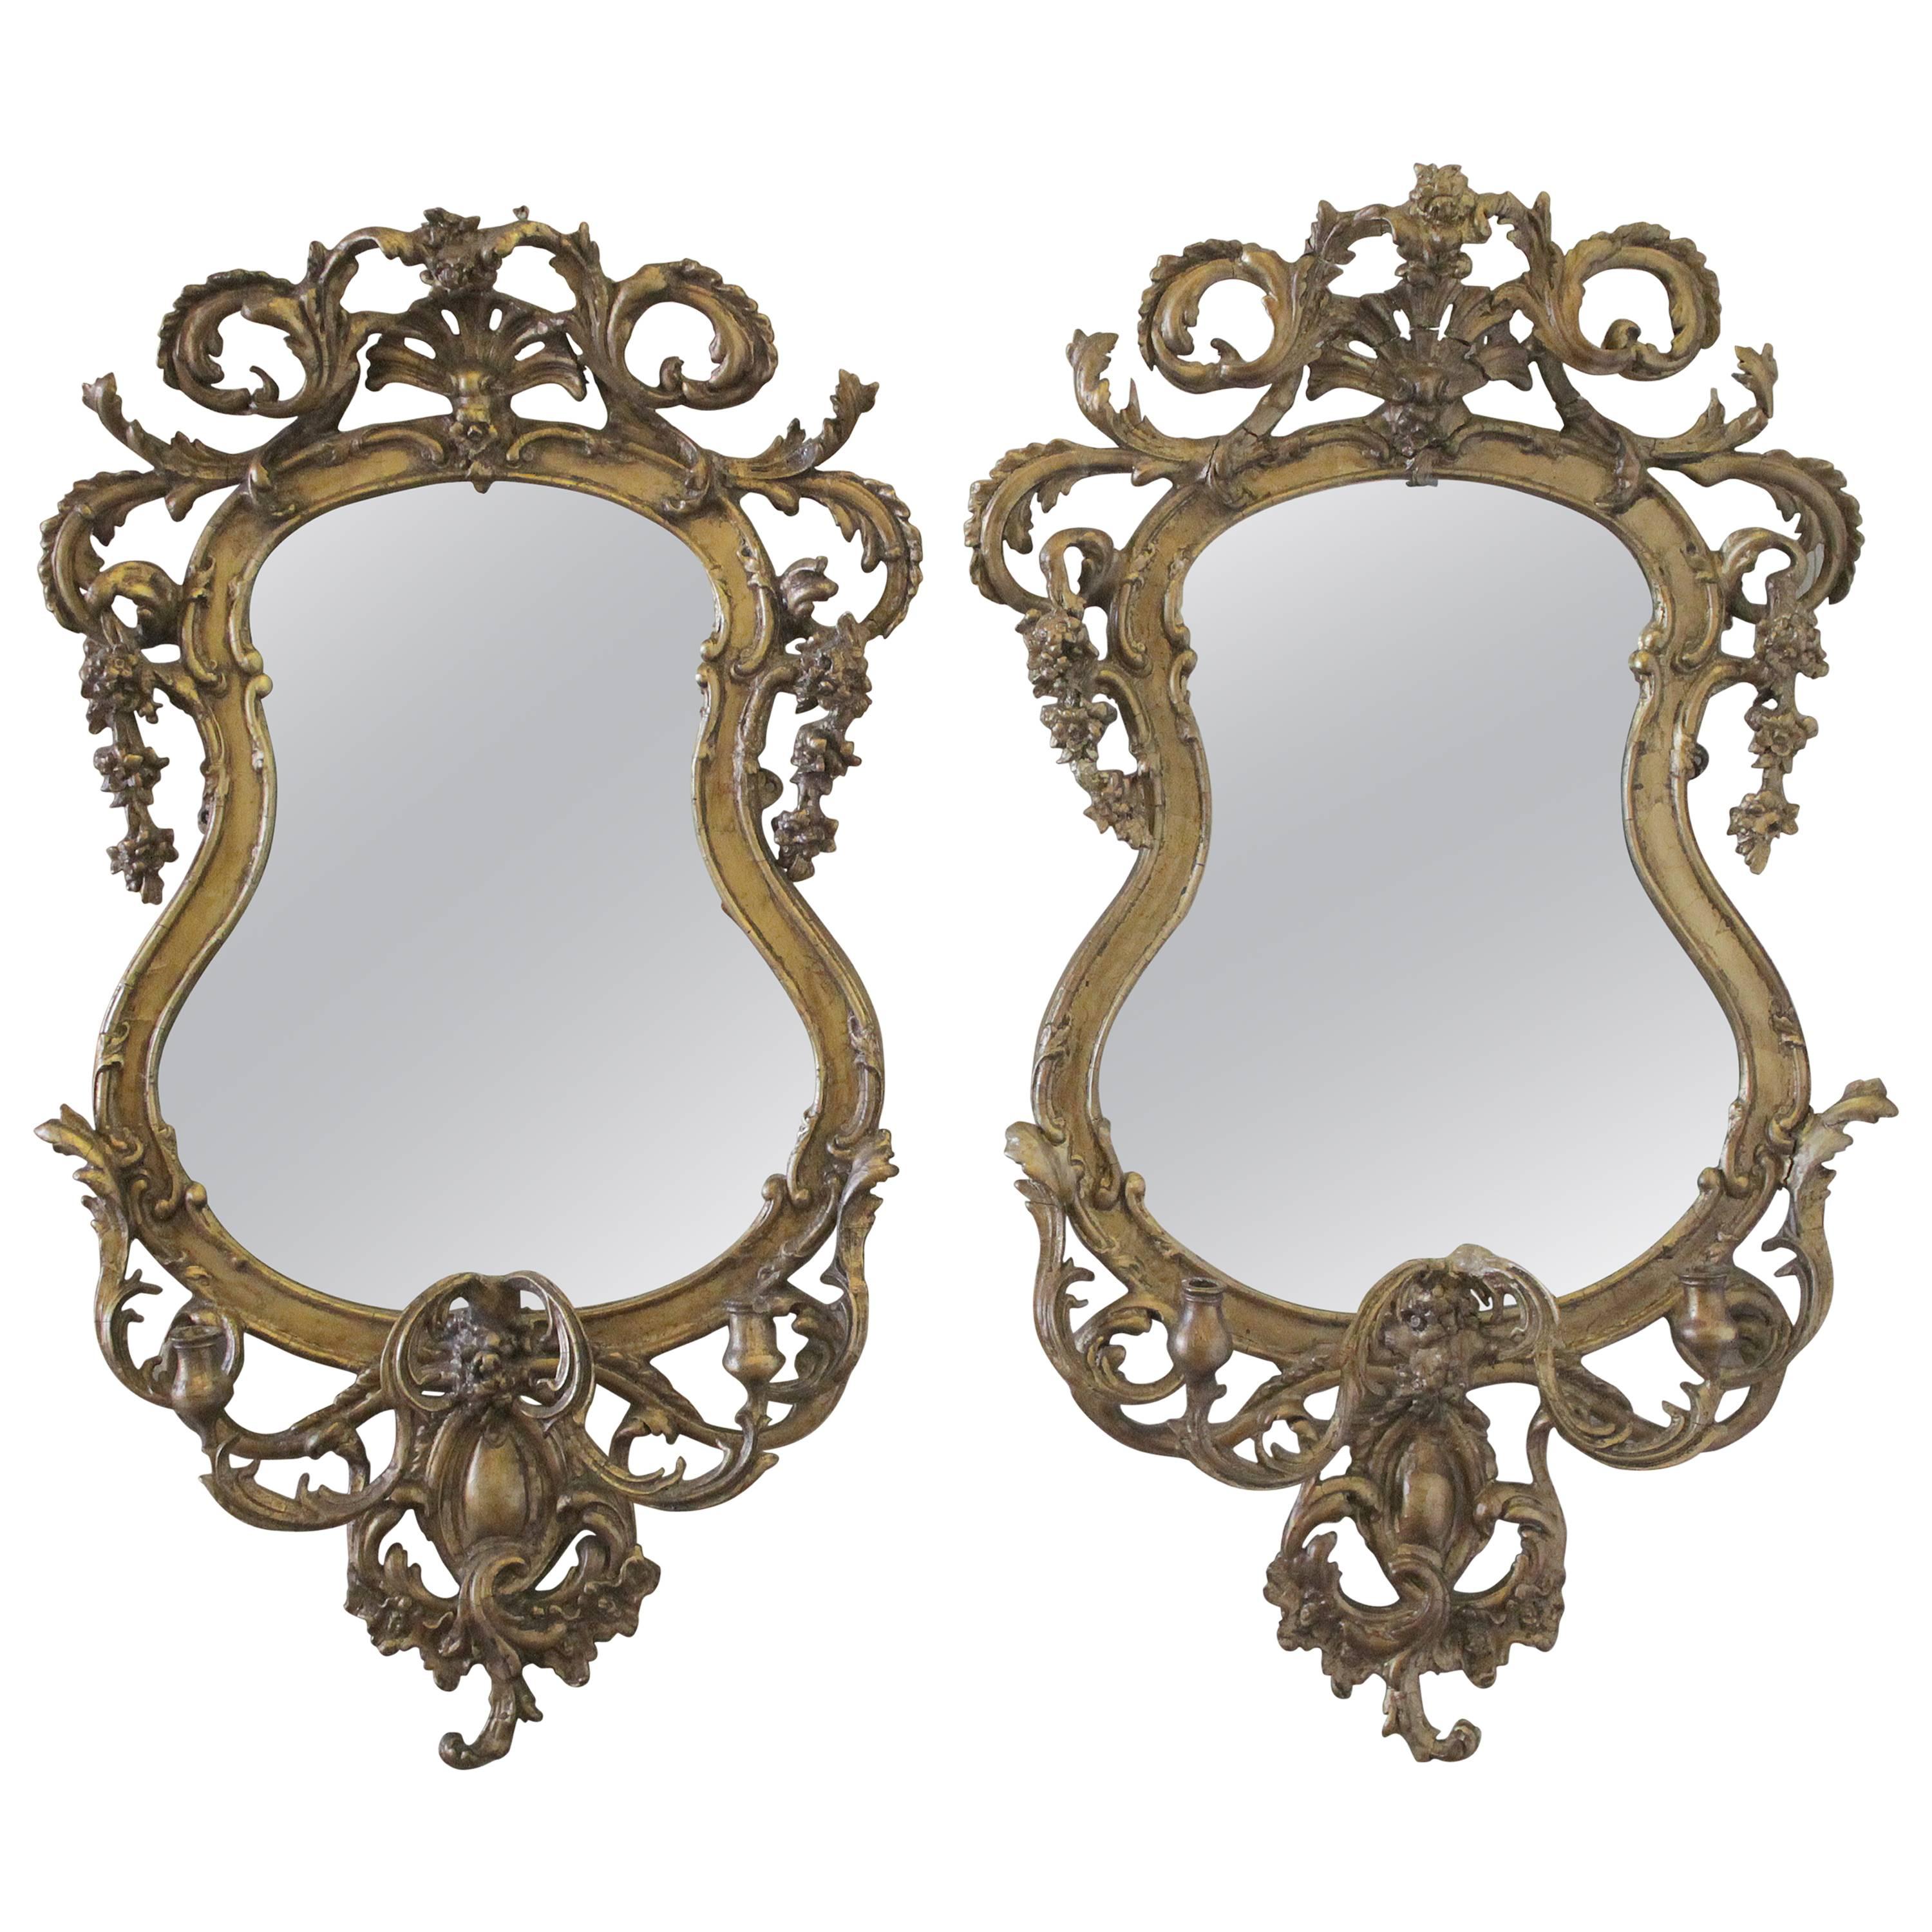 Pair of Two 18th Century French Giltwood Rocaille Mirrors with Girandoles